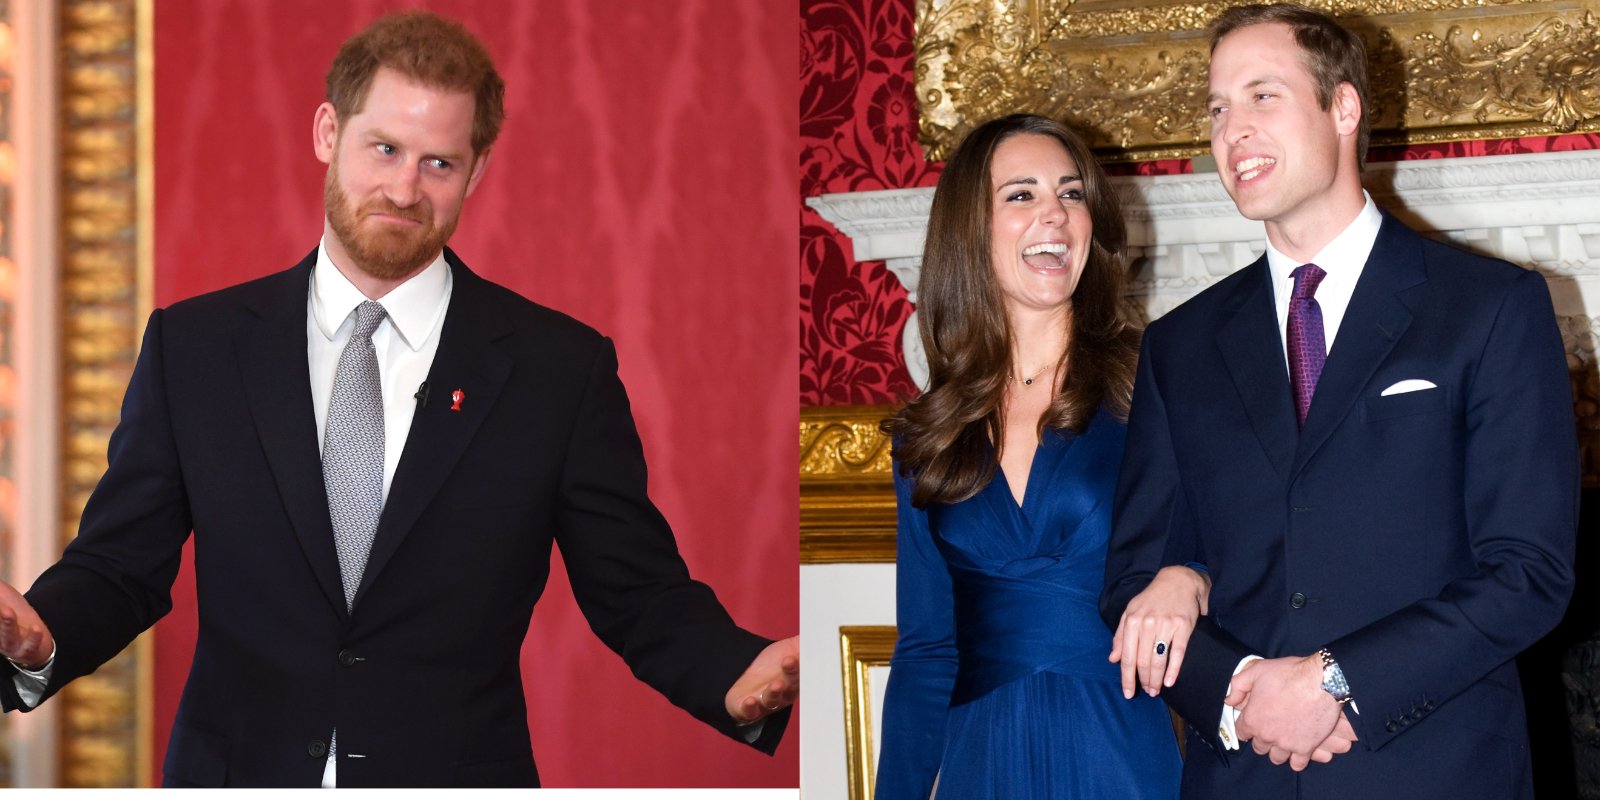 Prince Harry in a side by side photo with Kate Middleton and Prince William.